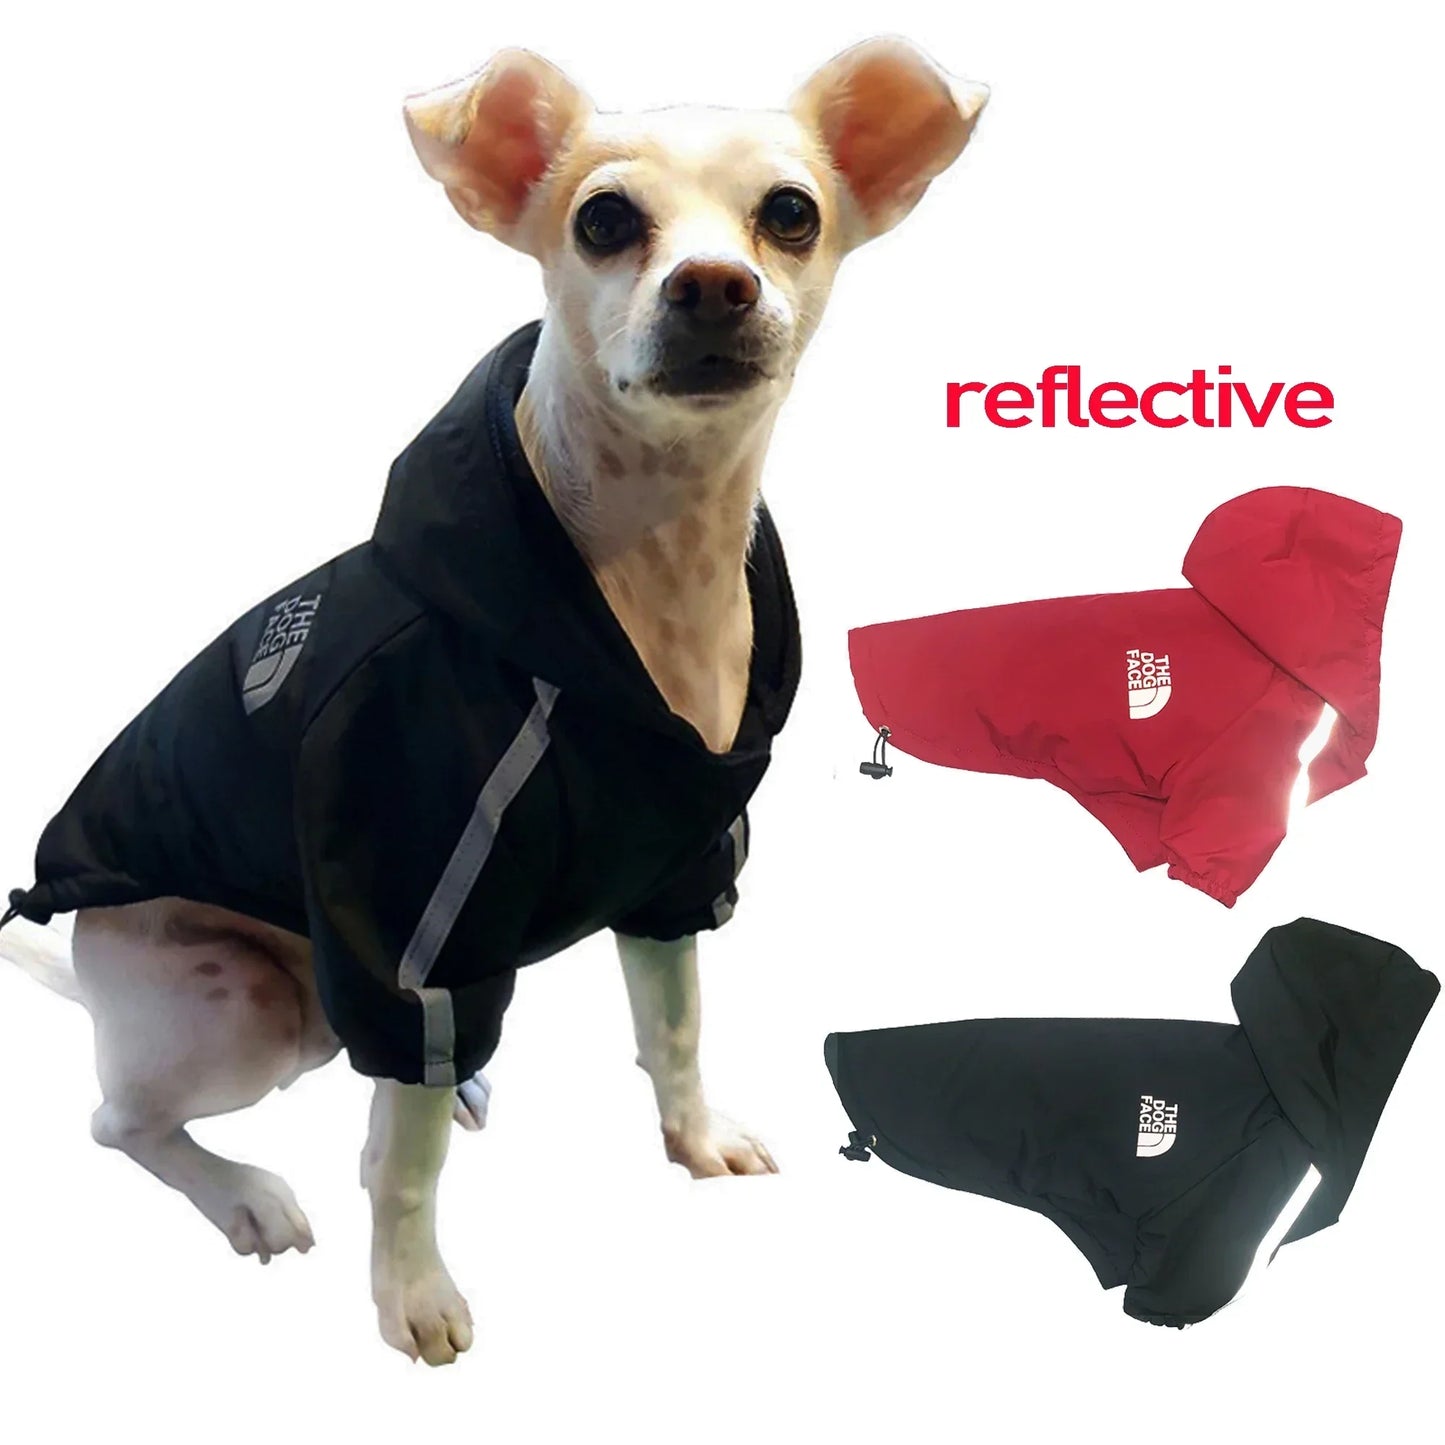 Reflective Pet Clothes Autumn Winter Pet Dog Waterproof Warm Coat Cotton Hooded Jacket The Dog Face Small Dog Clothes